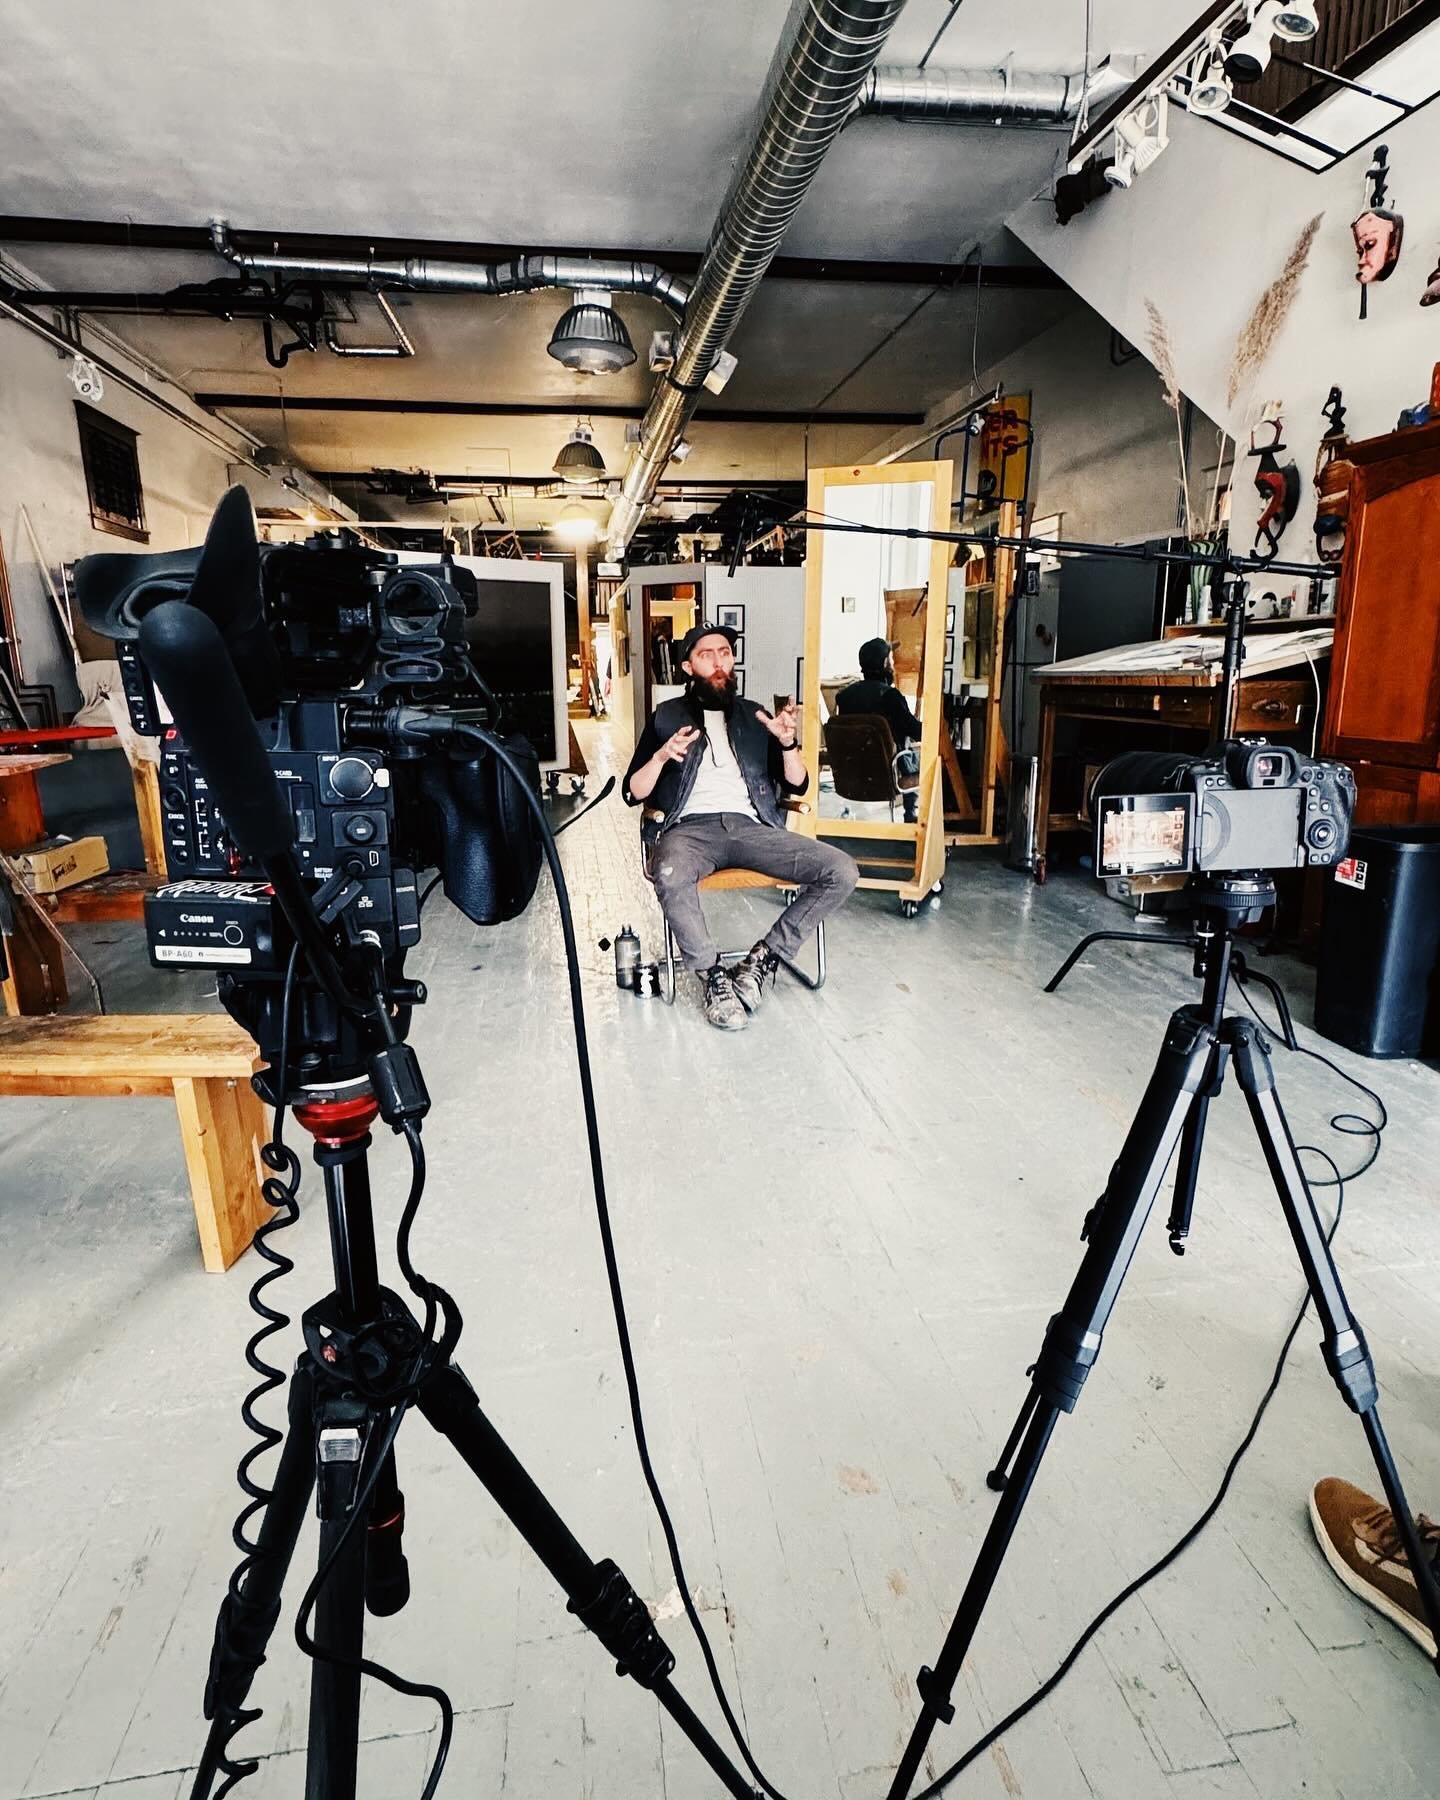 Behind the scenes interview with @paint_meditations 
&mdash;&mdash;
Getting ready for his show @ramble_gallery in June. 
.
.
.
#behindthescenes #videoproduction #artist #artgallery